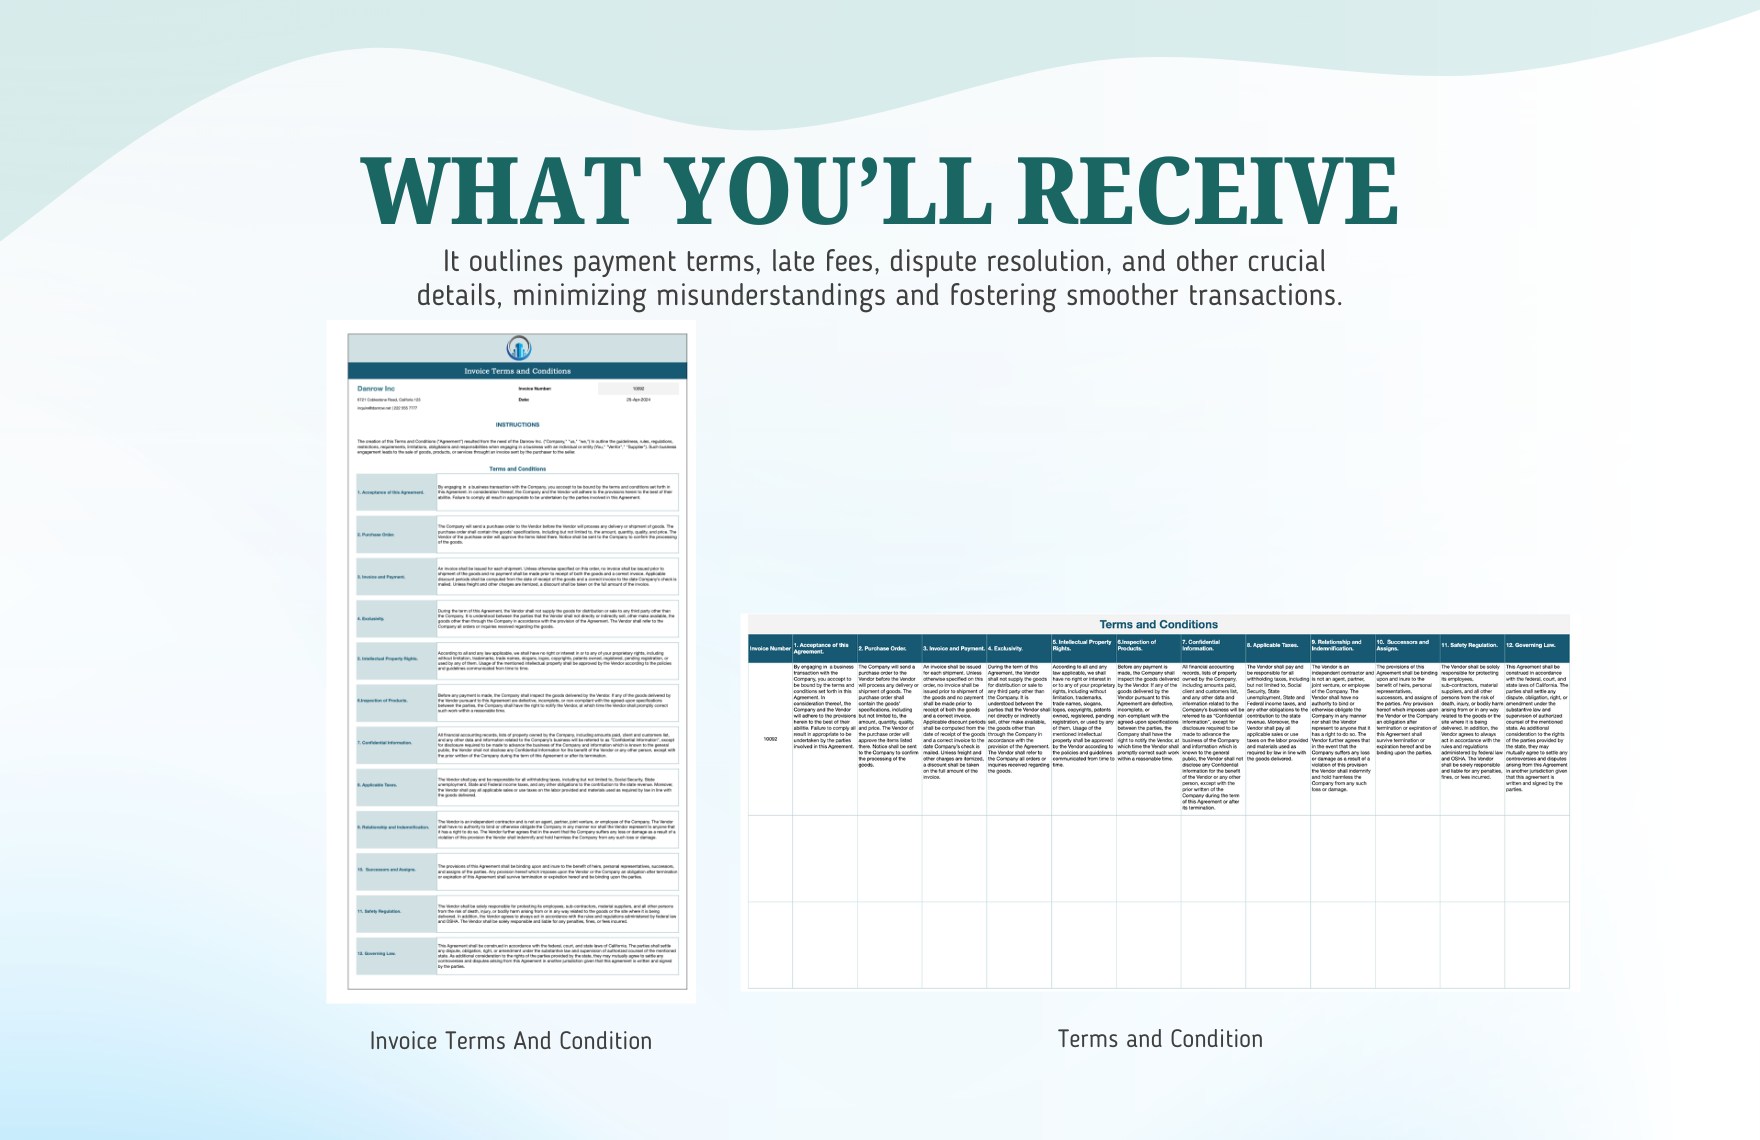 Invoice Terms And Conditions Template